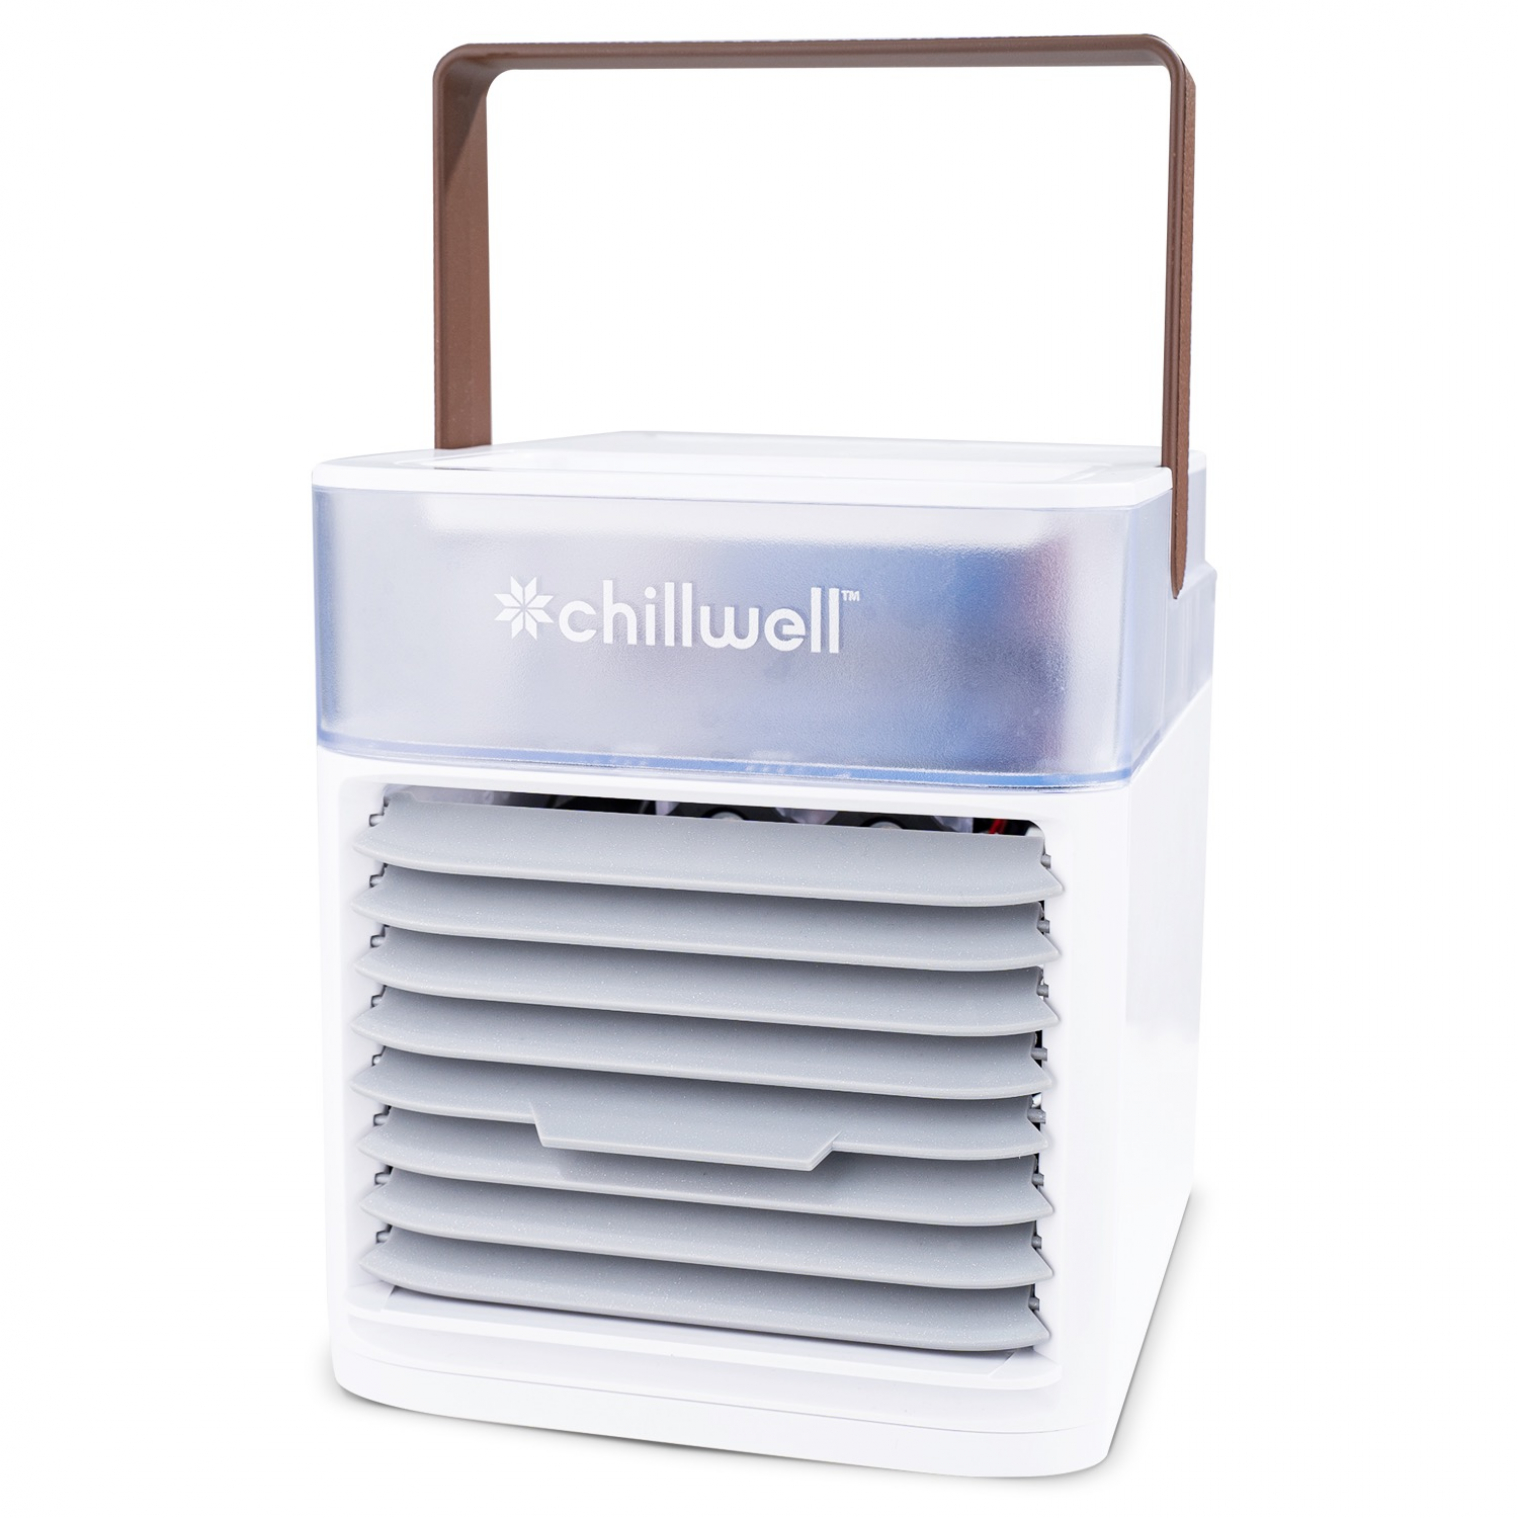 Portable Air Conditioner Chillwell AC